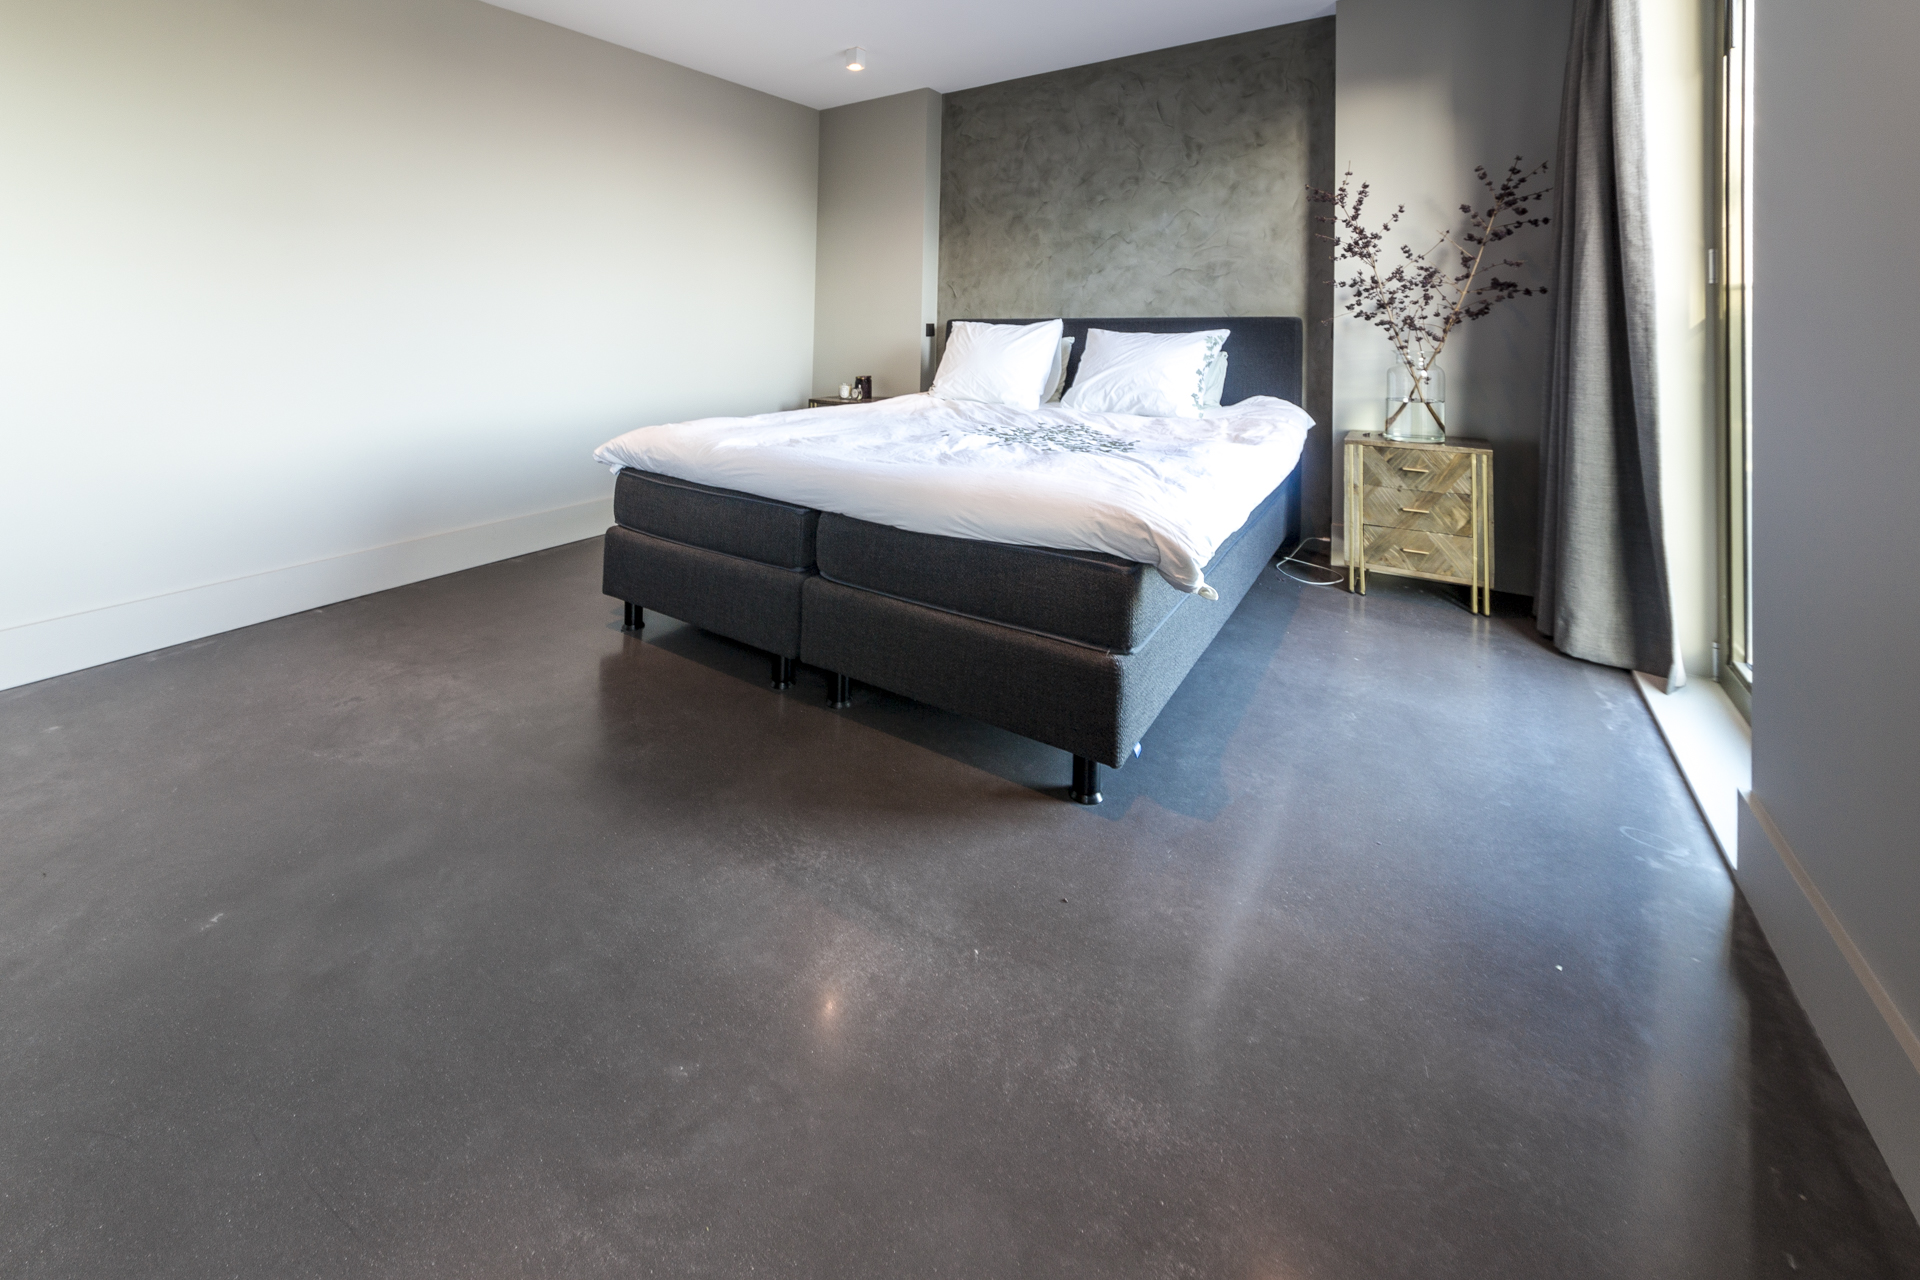  : Concrete floors at home 